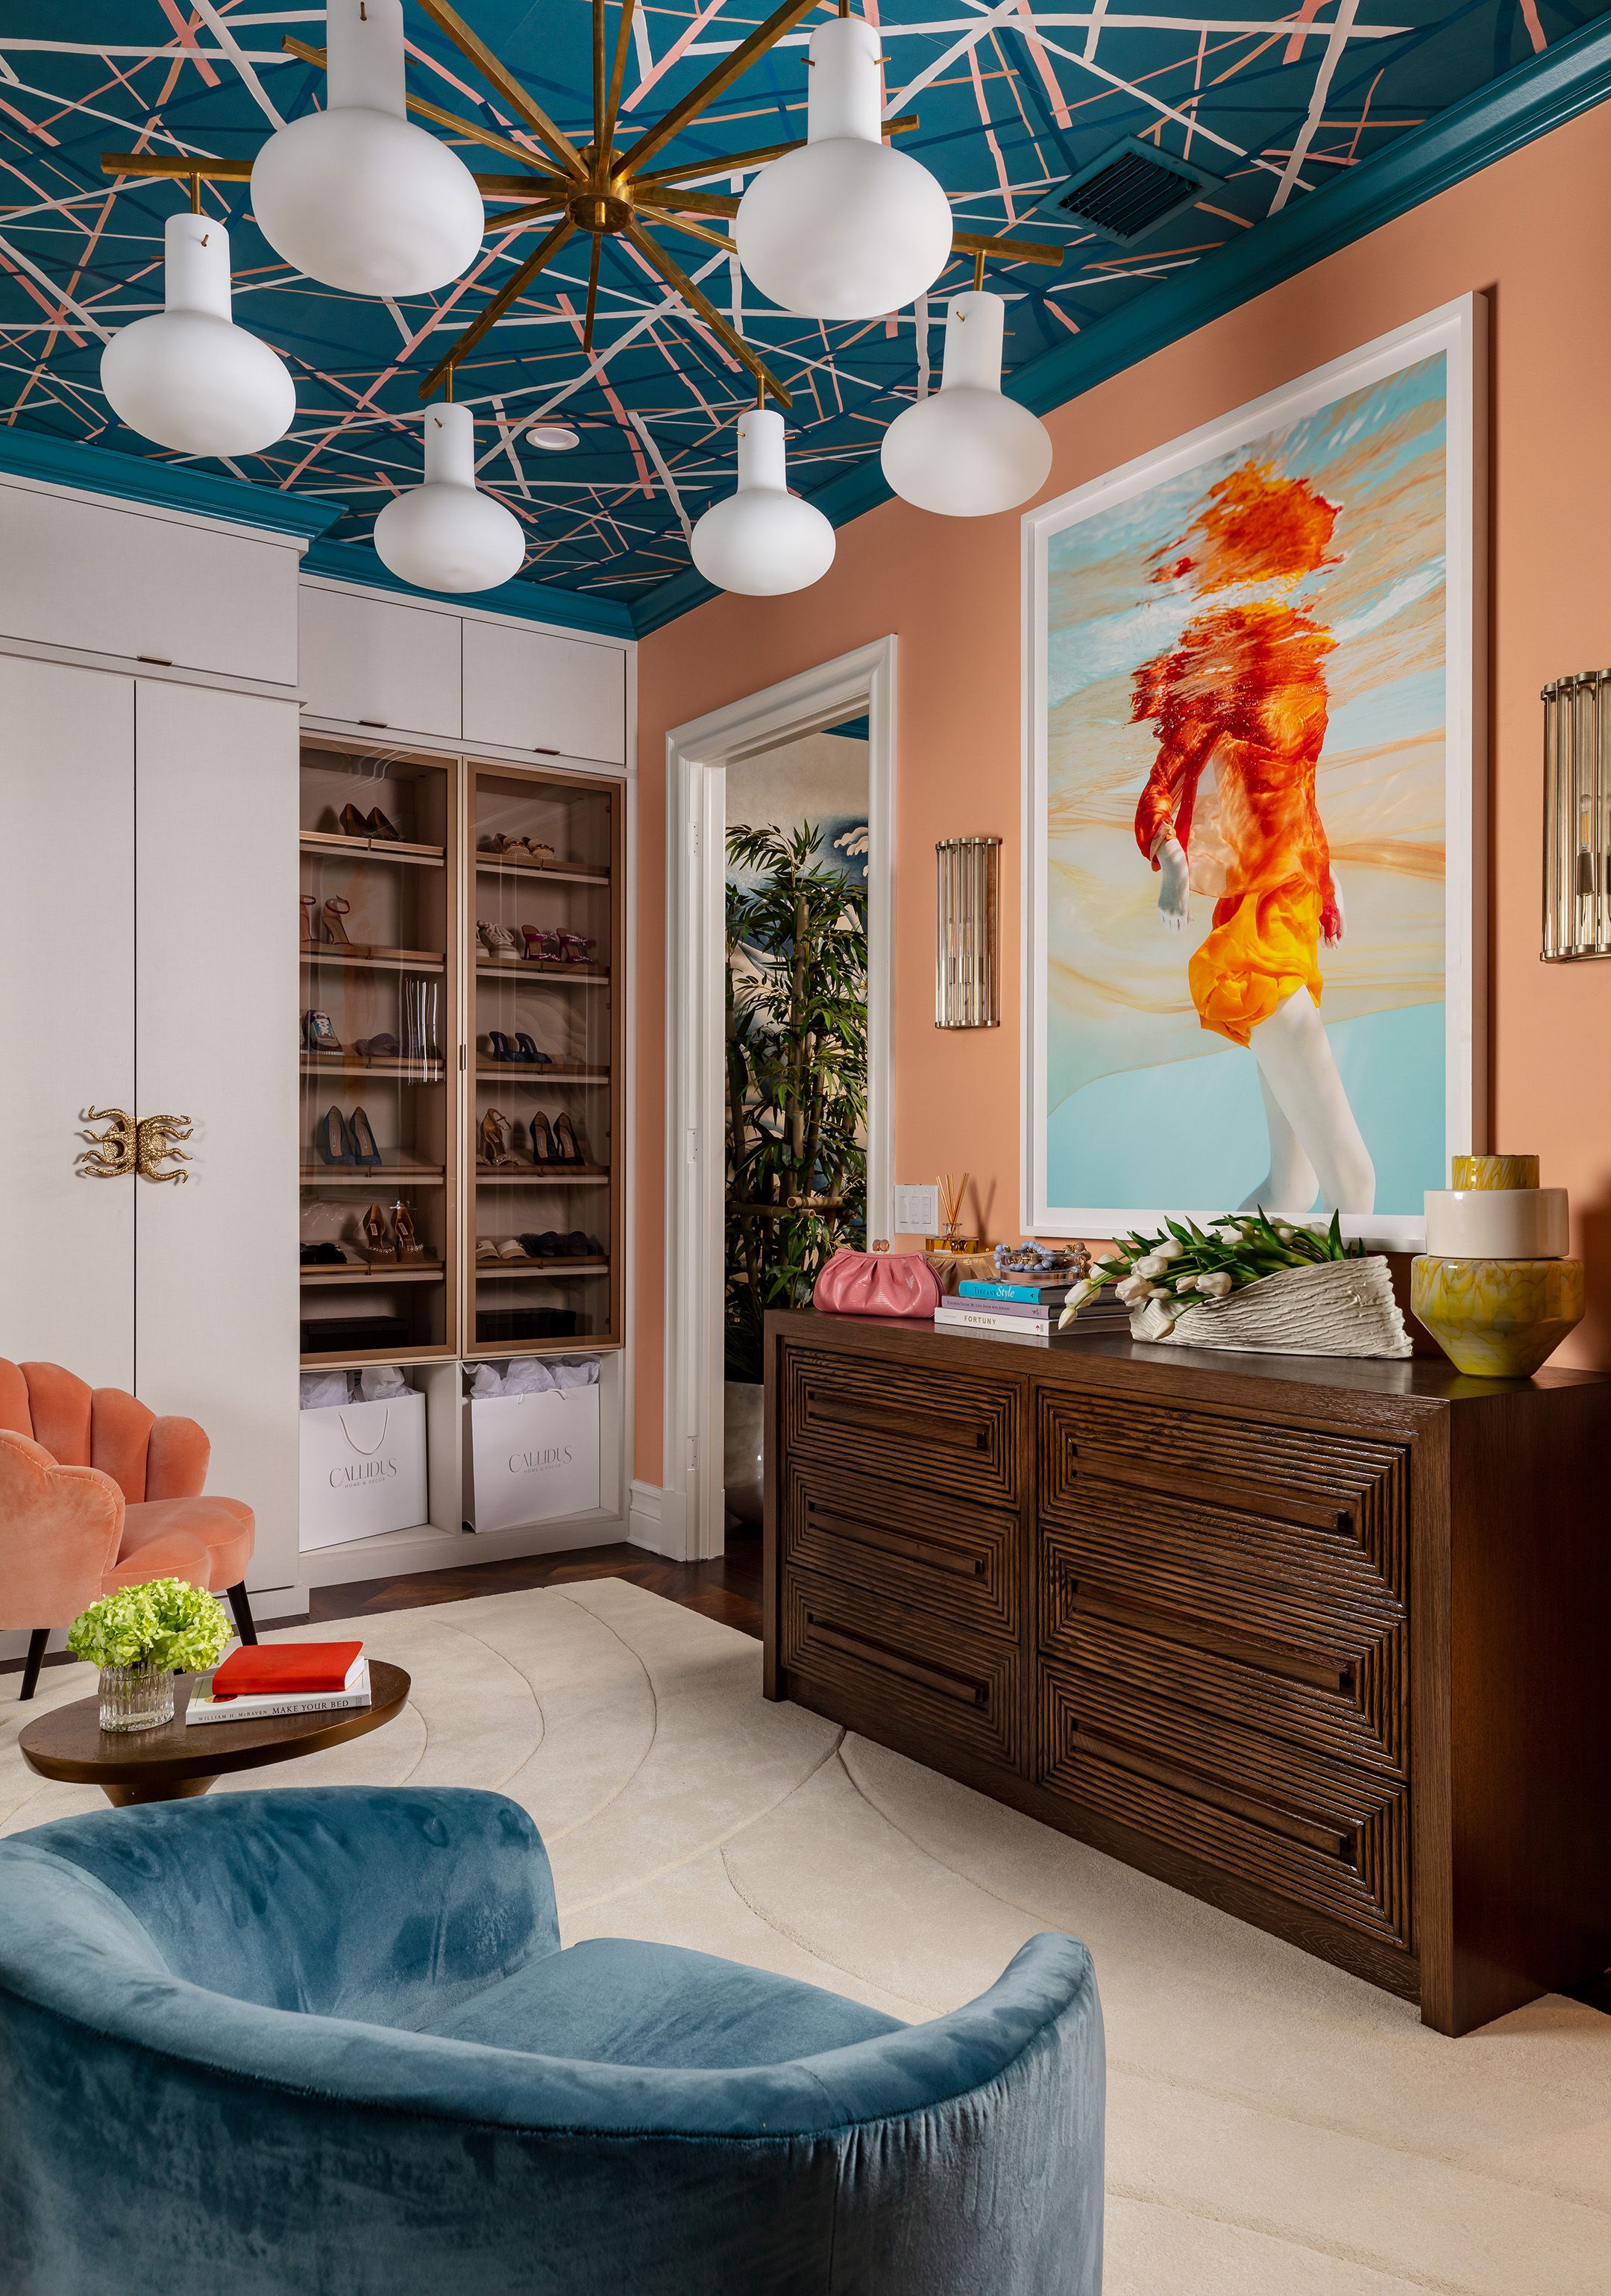 The Best Design Takeaways From the 2023 Kips Bay Palm Beach Showhouse